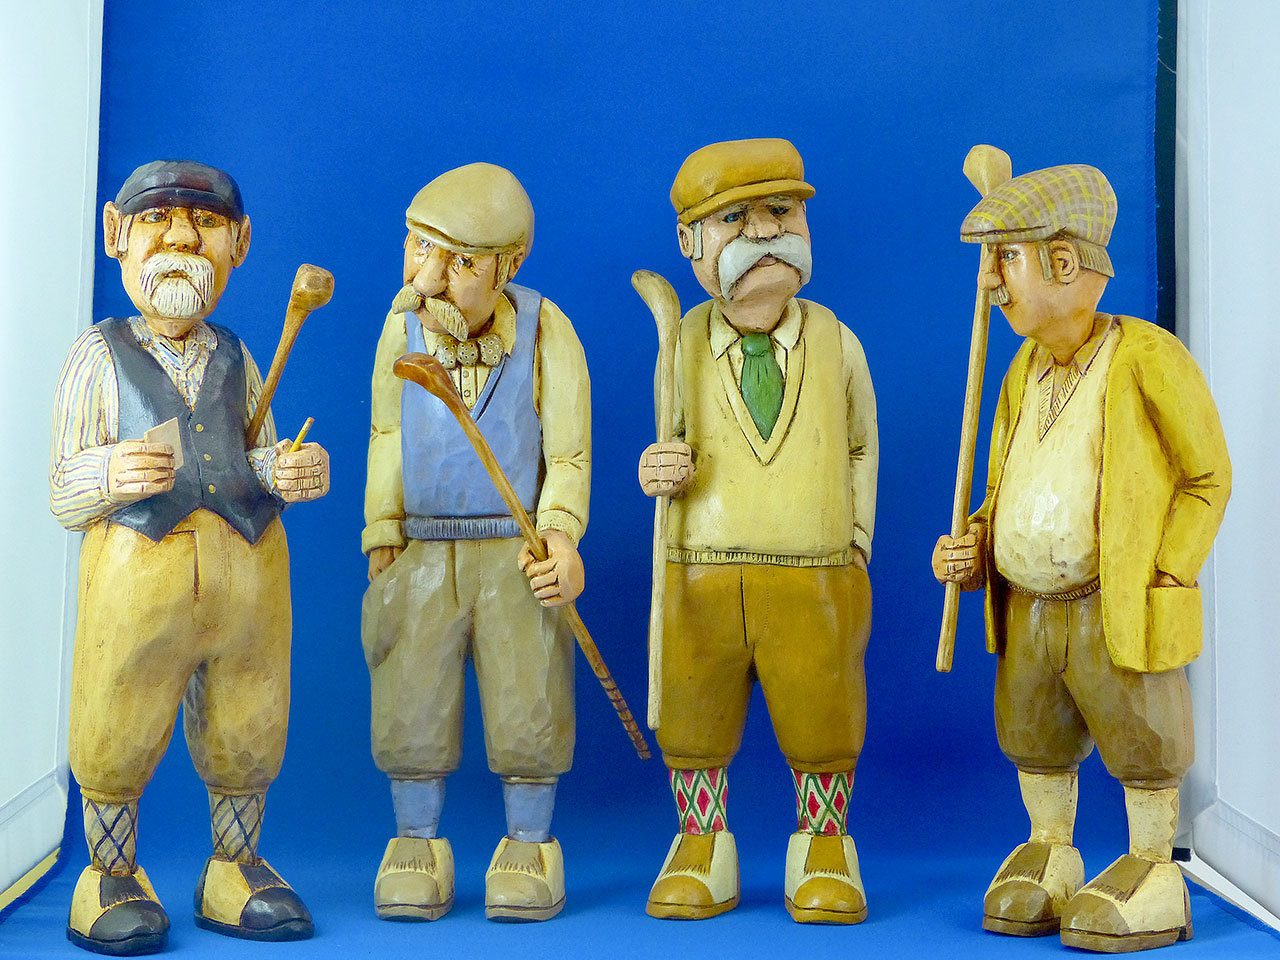 These wood carvings of English golfers by Pat Donlin will be on display Saturday during the 11th annual Wooden Art Show in Sequim. (Pacific Northwest Wood Artisans)